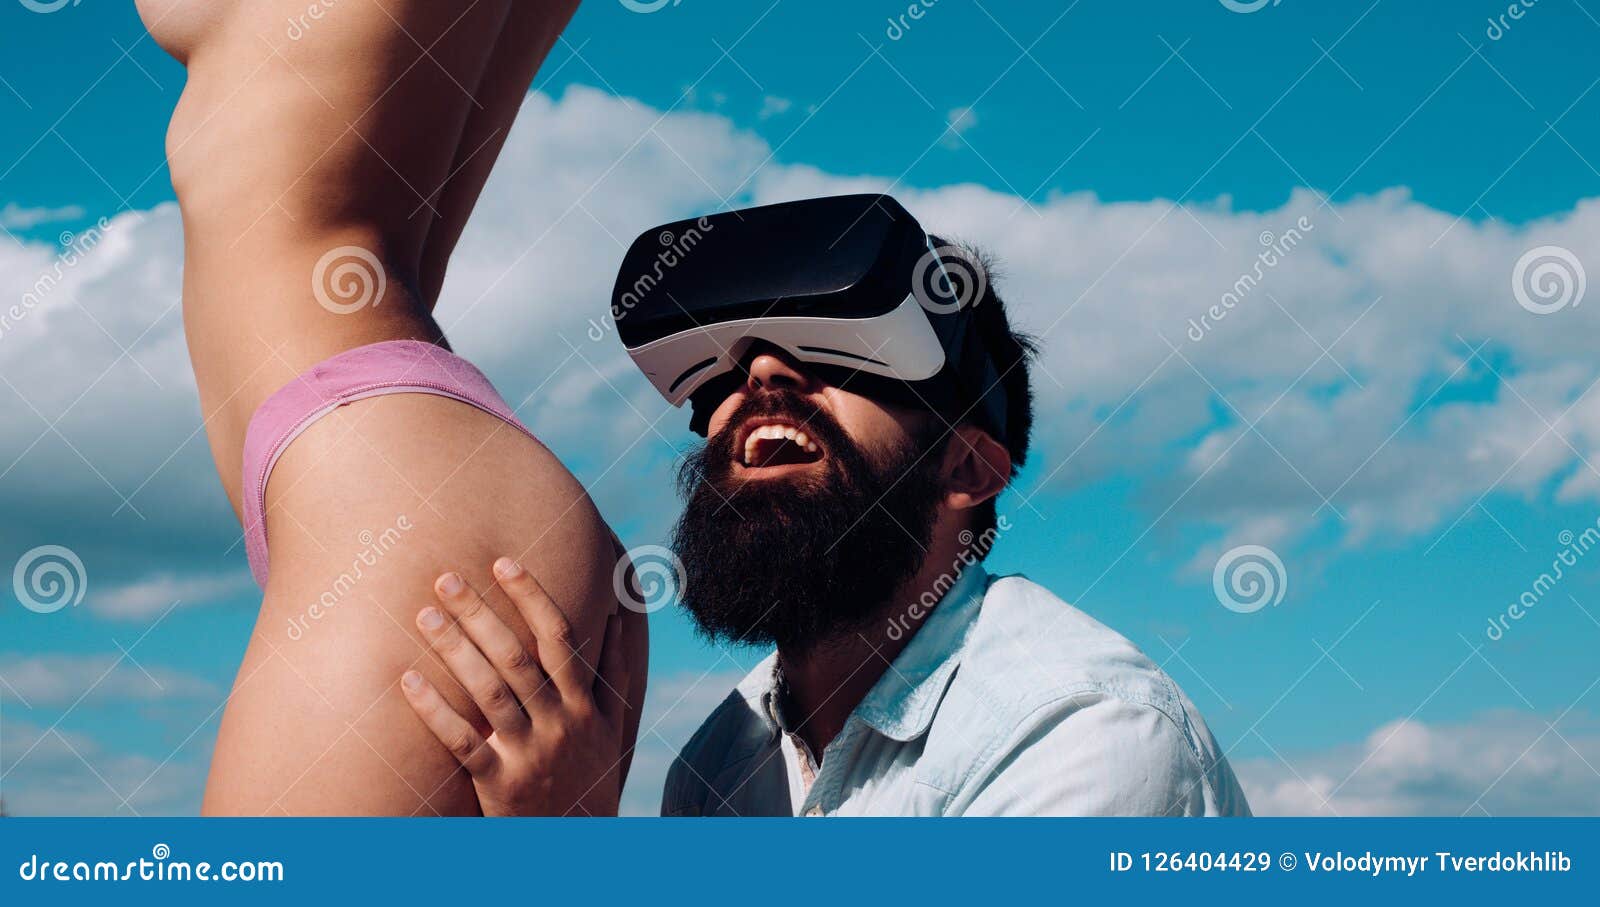 Virtual Sex Addiction. VR is Here. Virtual Sex Machine. Fantasies of  Subjectivity and Embodiment Stock Image - Image of games, glasses: 126404429